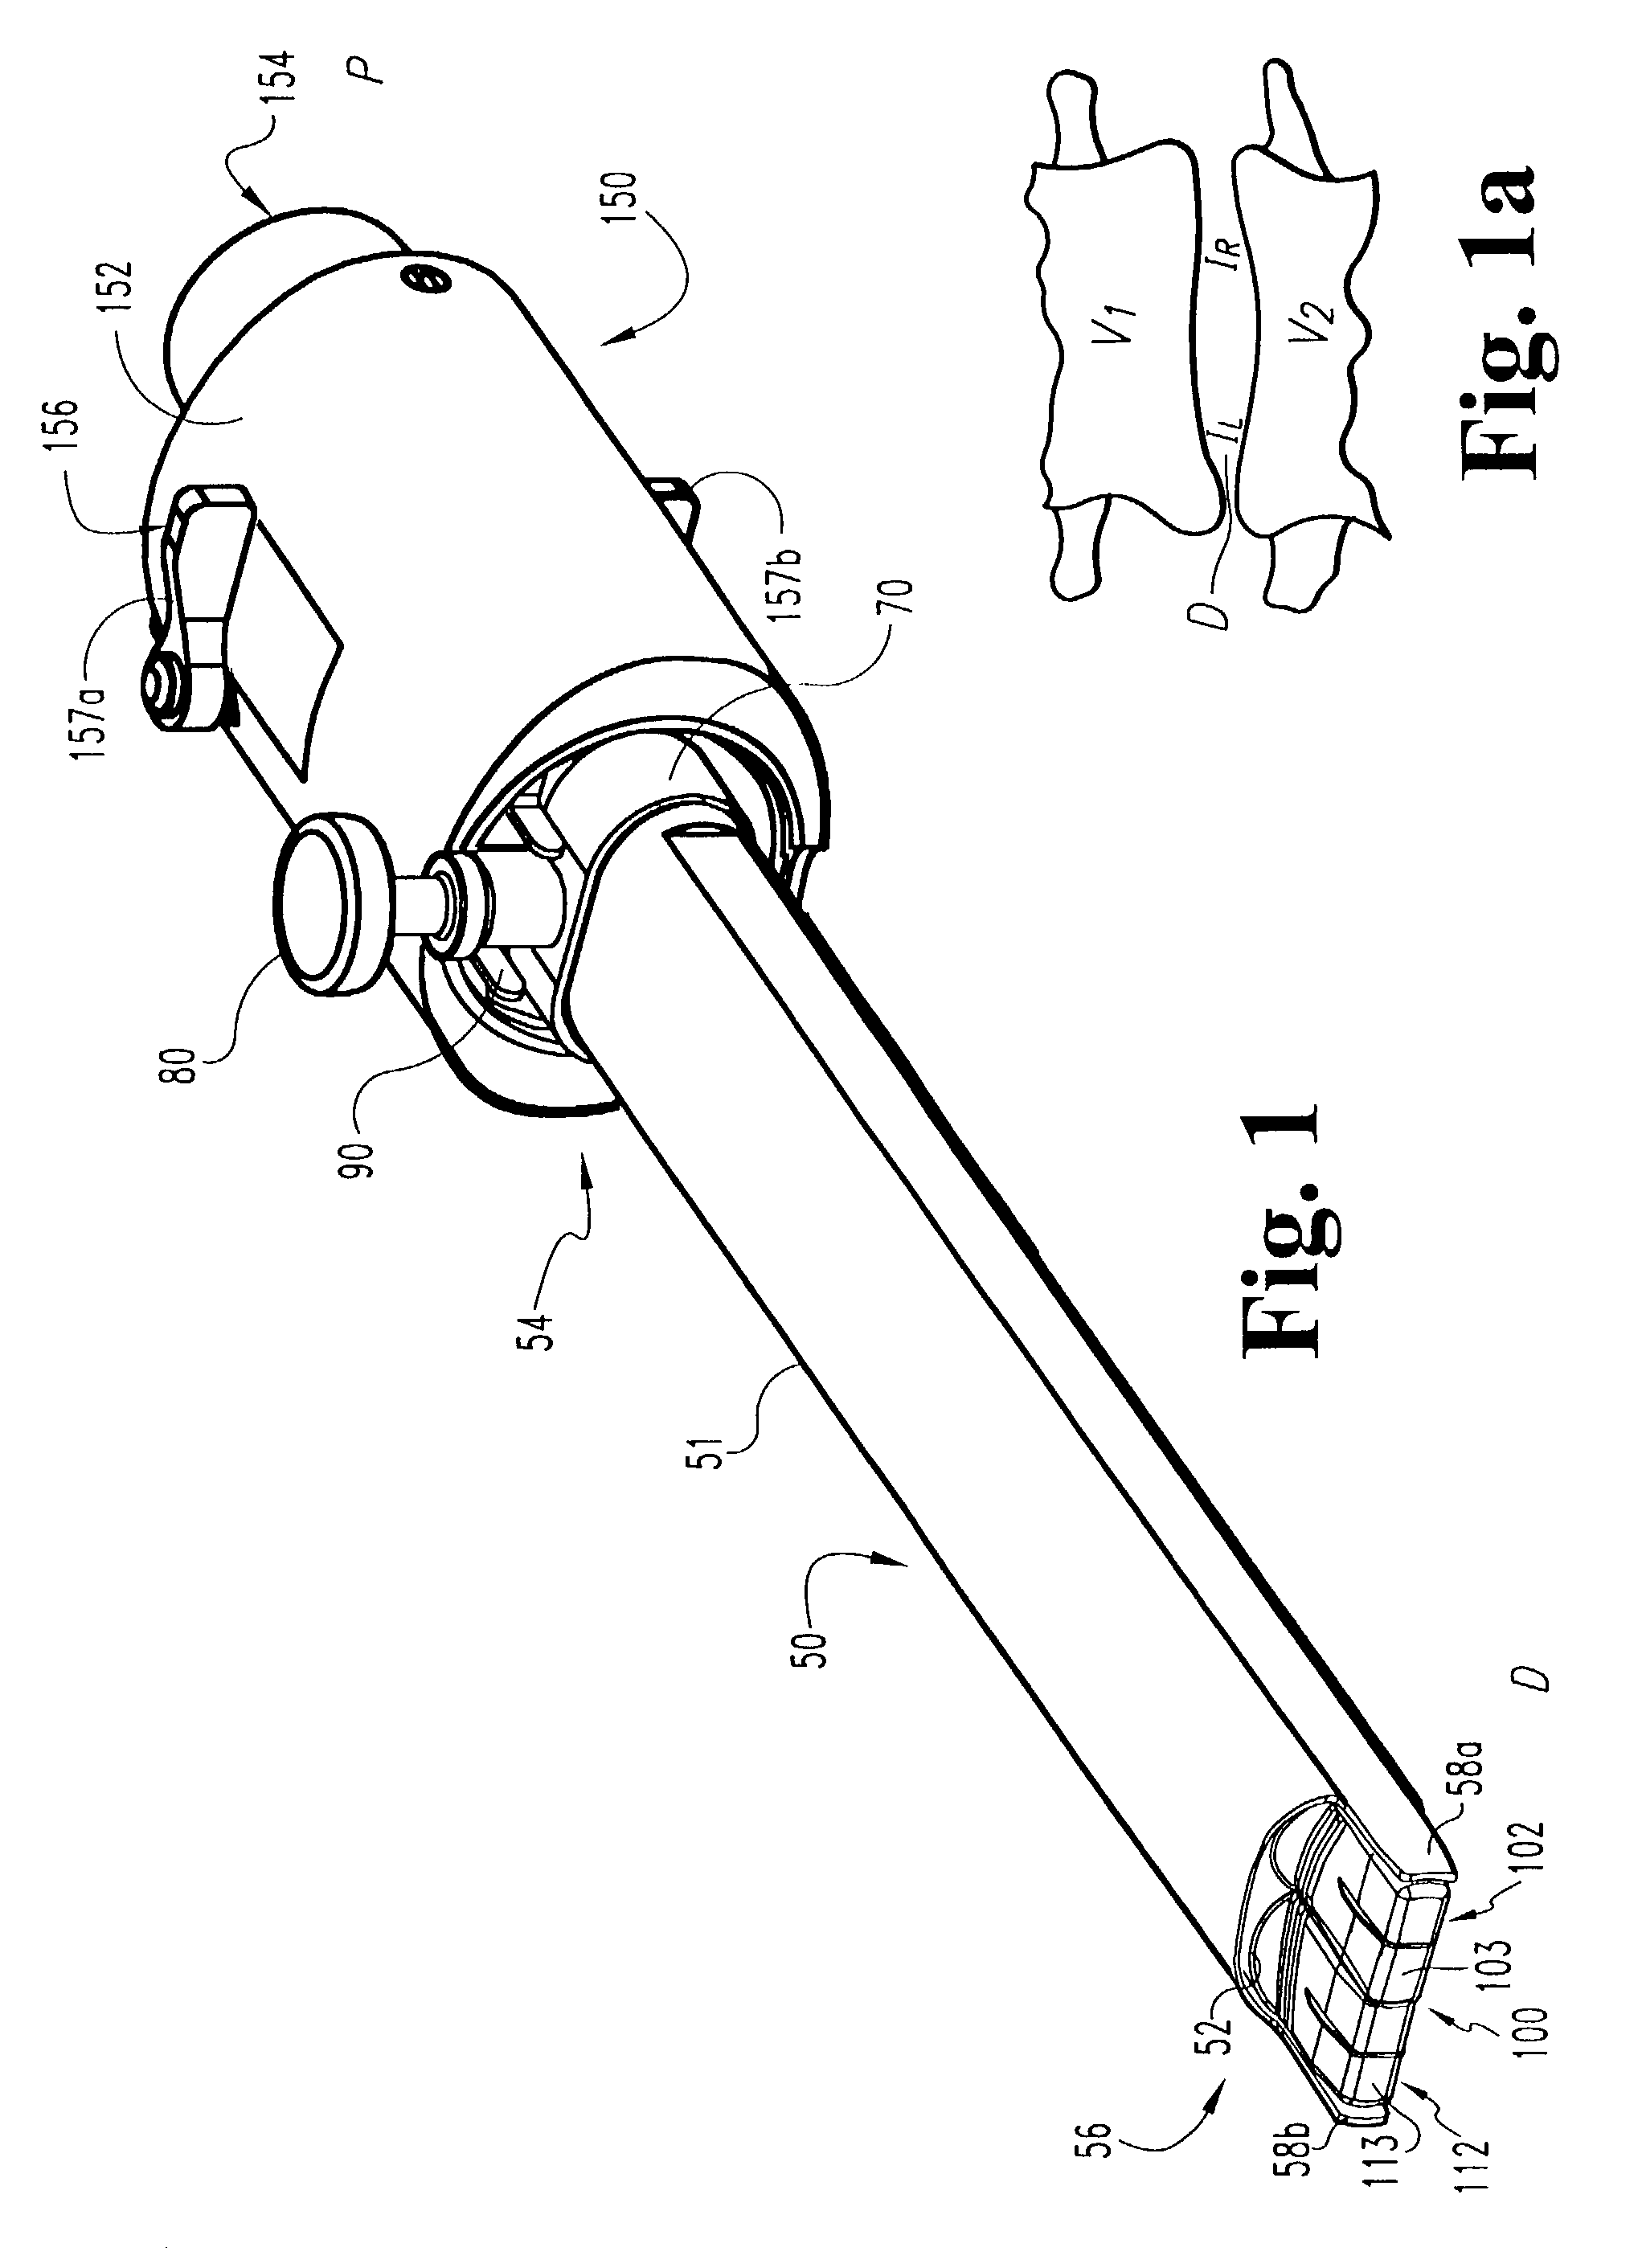 Methods and instruments for laparoscopic spinal surgery